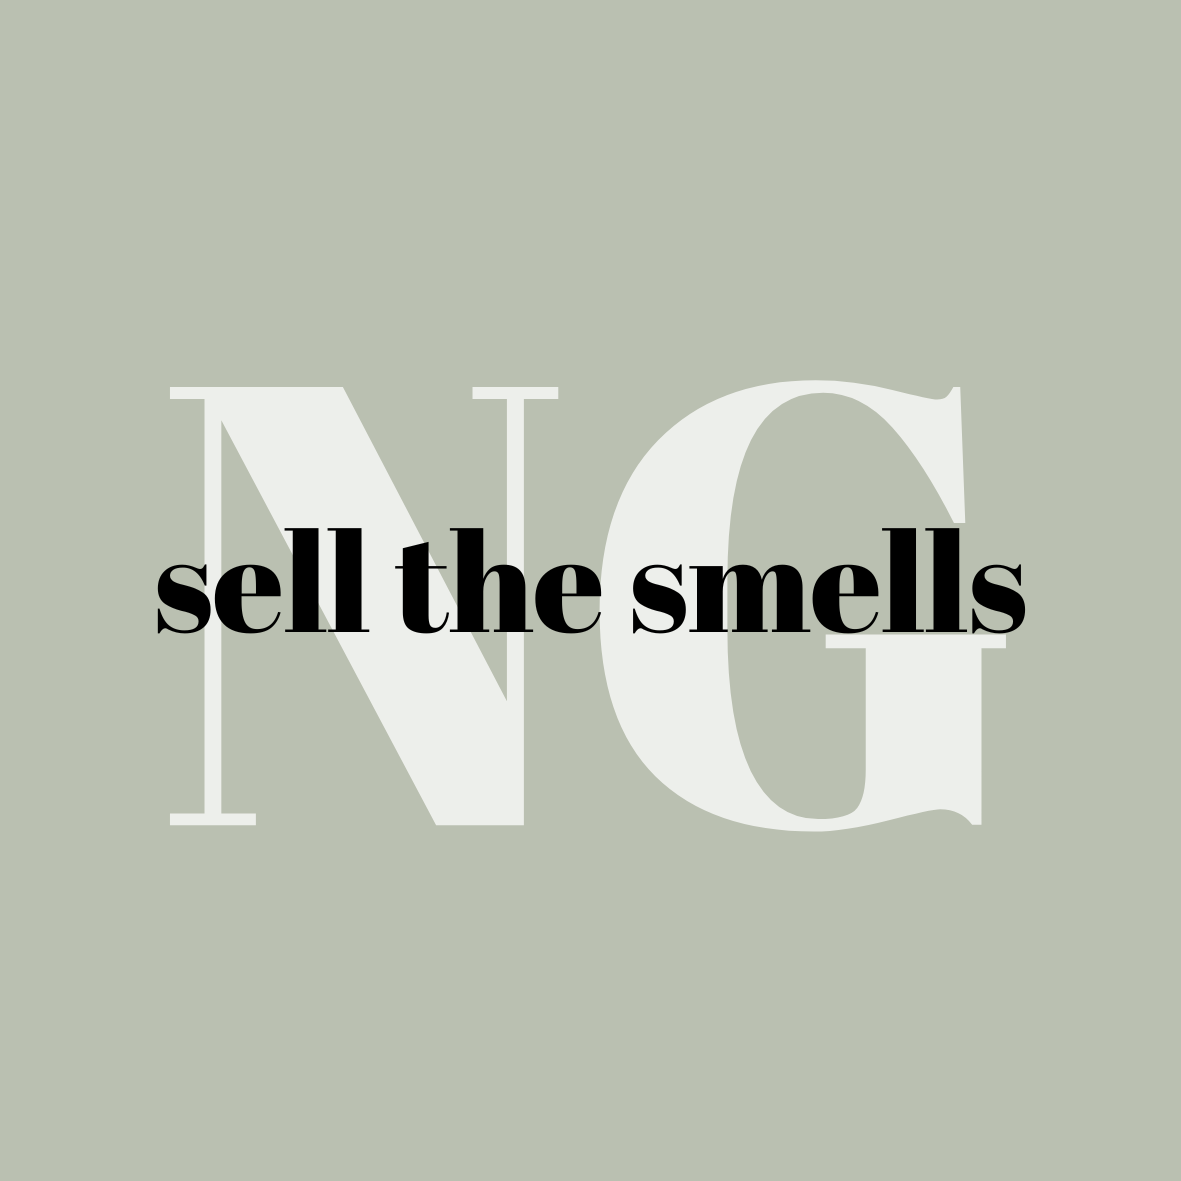 sell the smells.